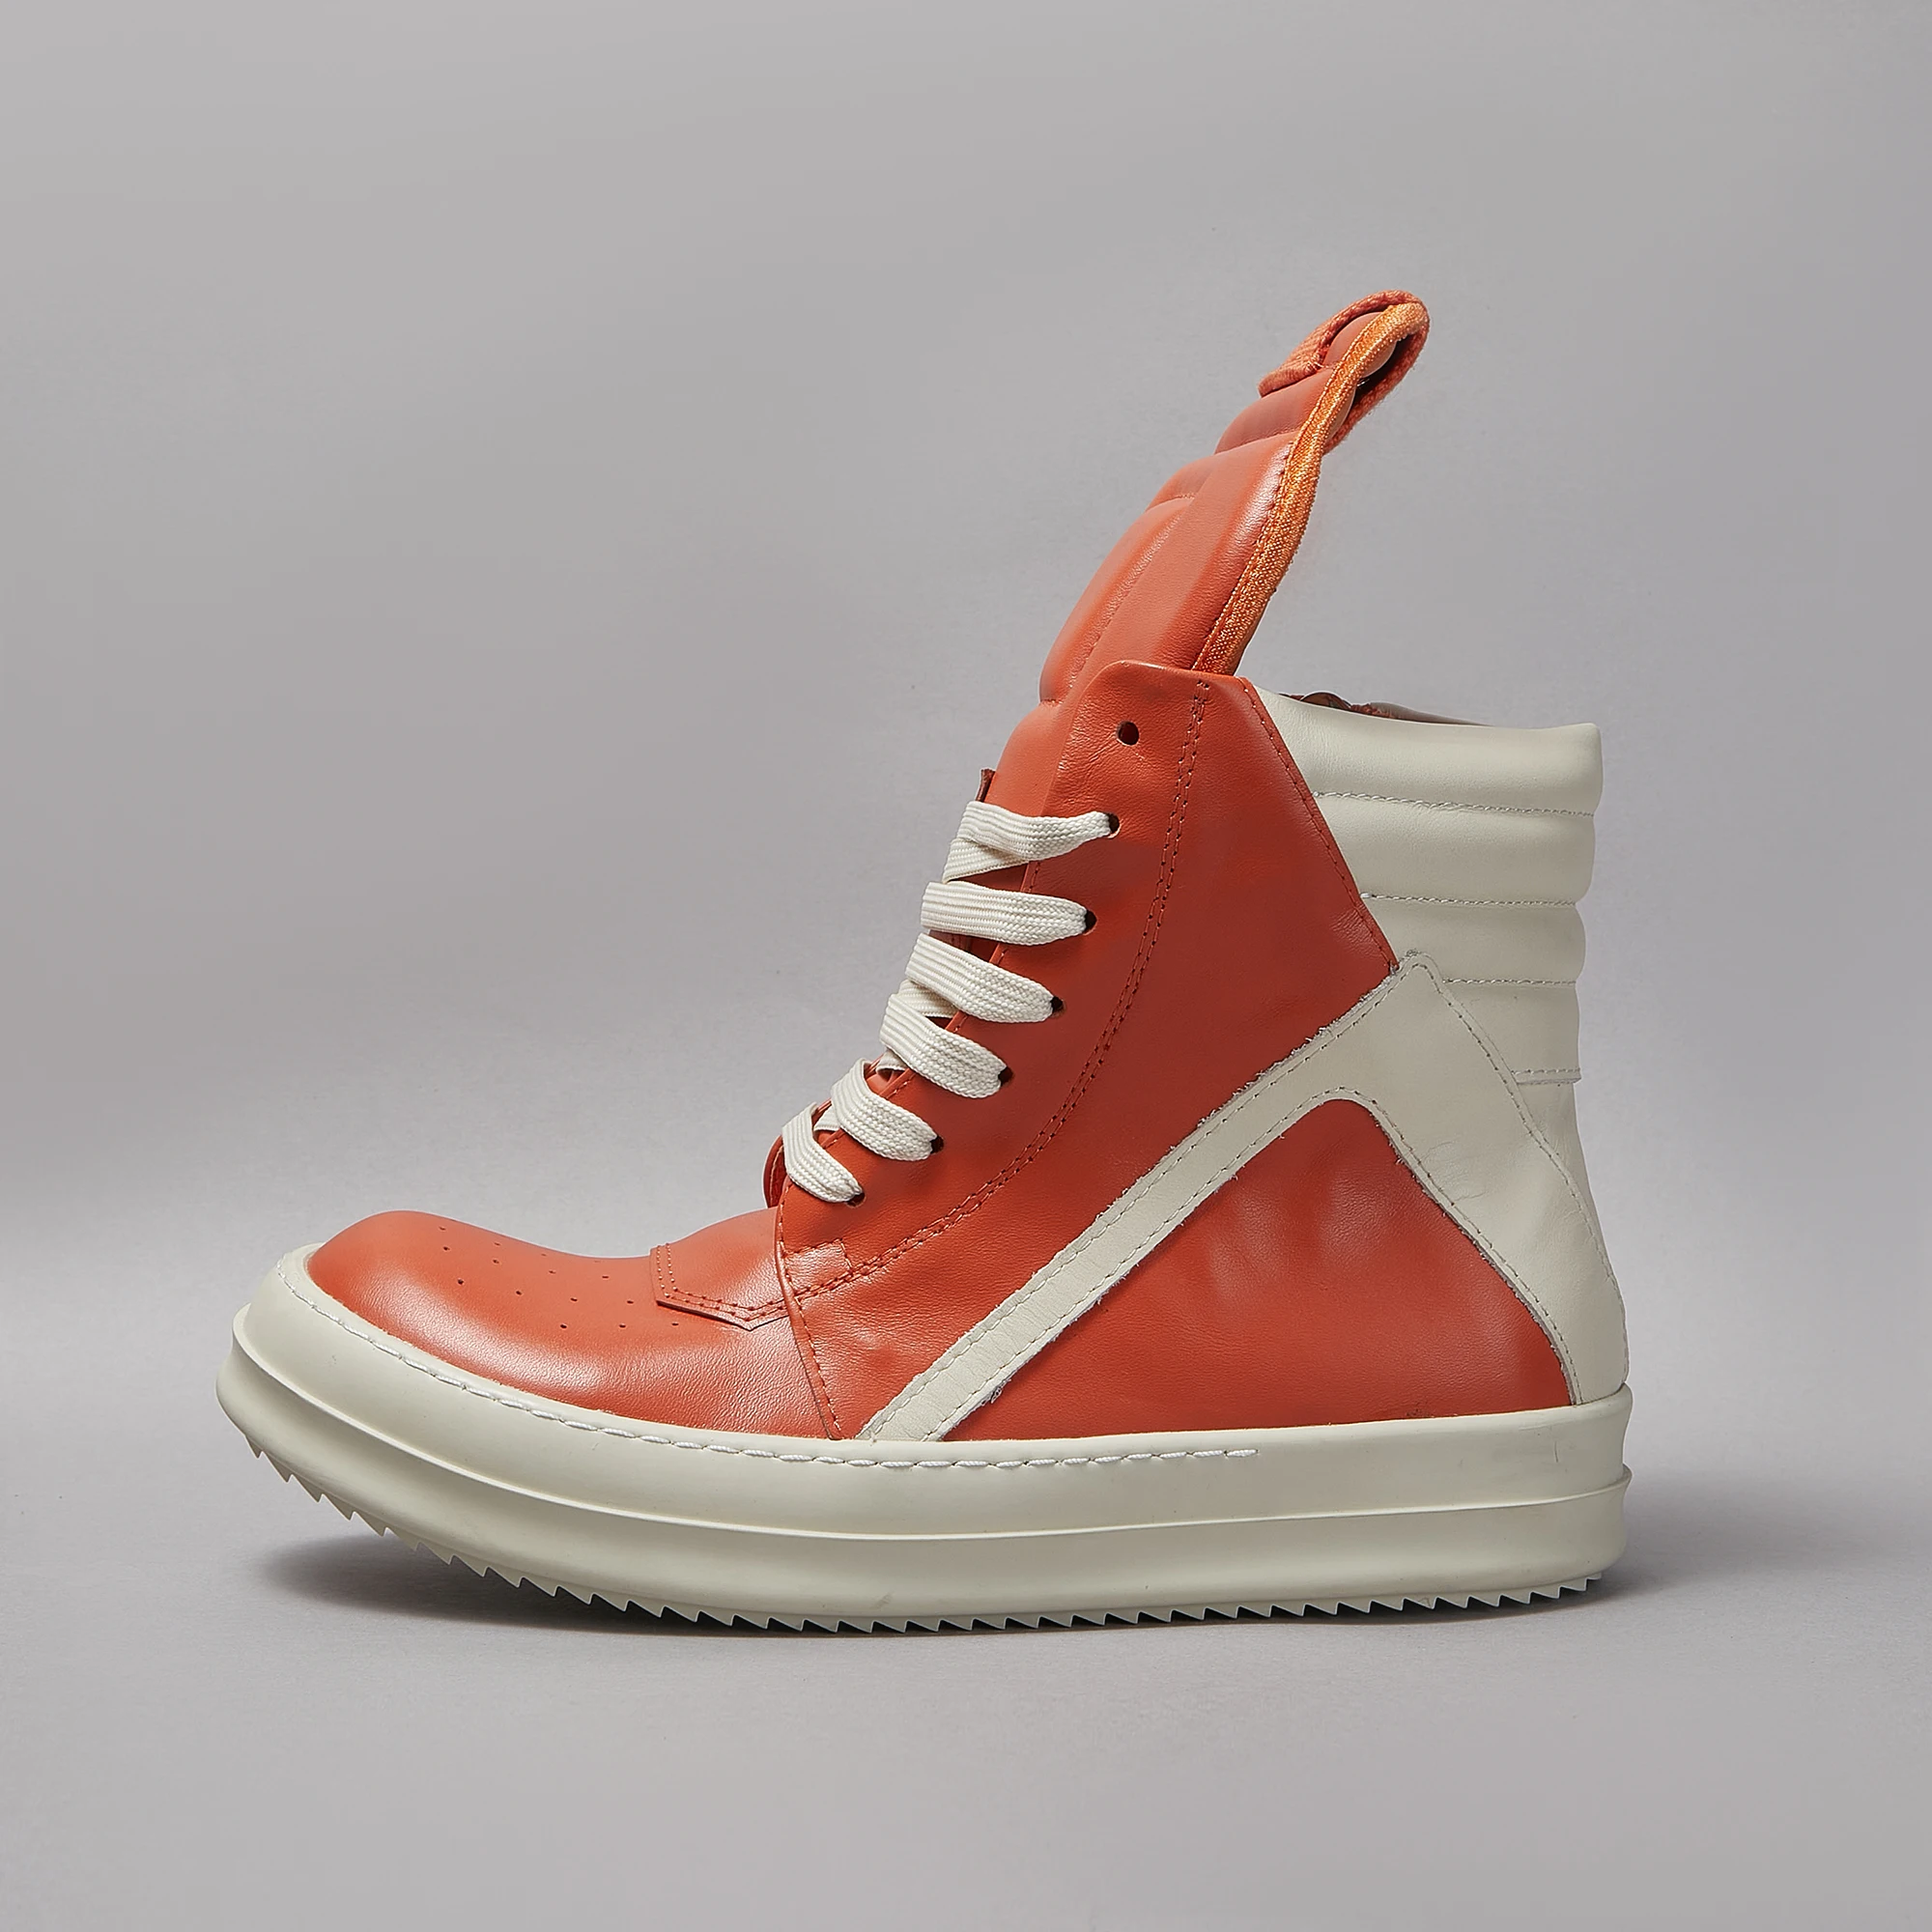 Ricks Casual Men Shoe High Top Women Sneaker owens Quality Orange Geobasket Leather Zip Luxury Trend Thick-sole Flat Ankle Boot